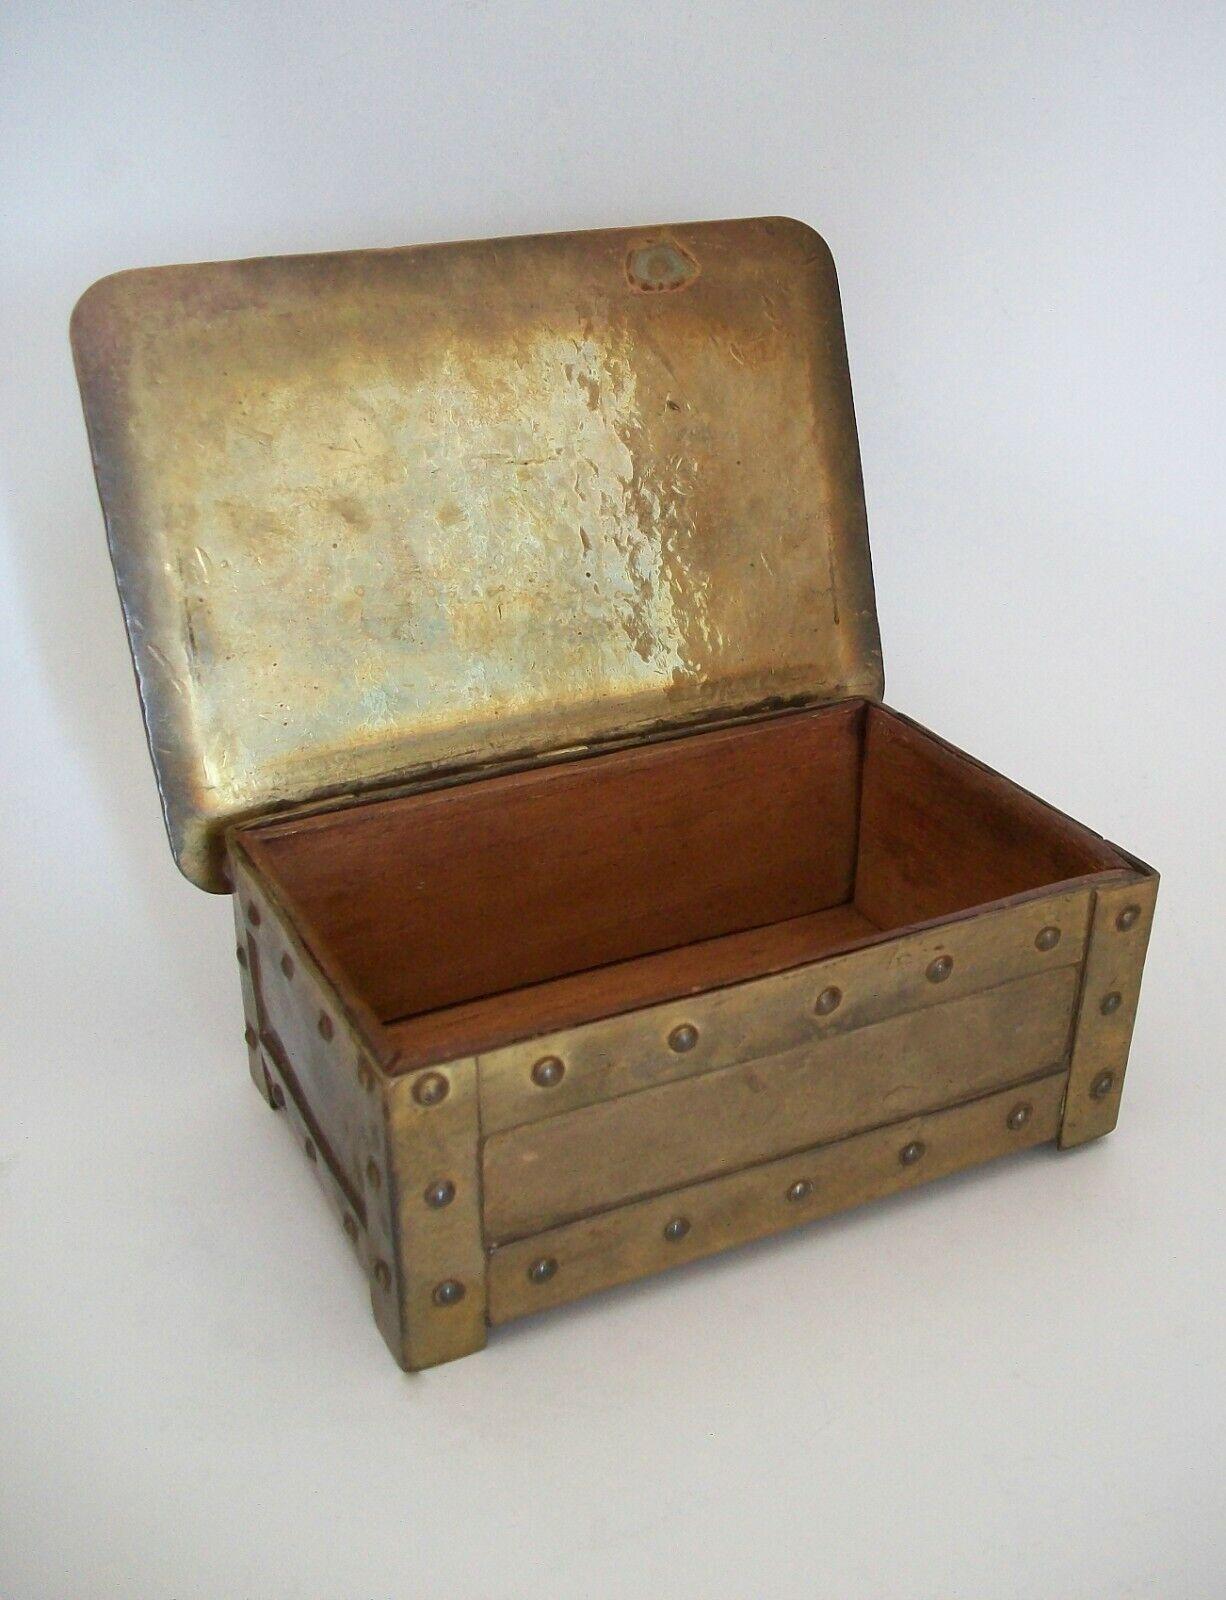 A. J. SEWARD - Arts & Crafts Brass Box - Cedar Lined - U.K. - Early 20th Century In Good Condition For Sale In Chatham, ON